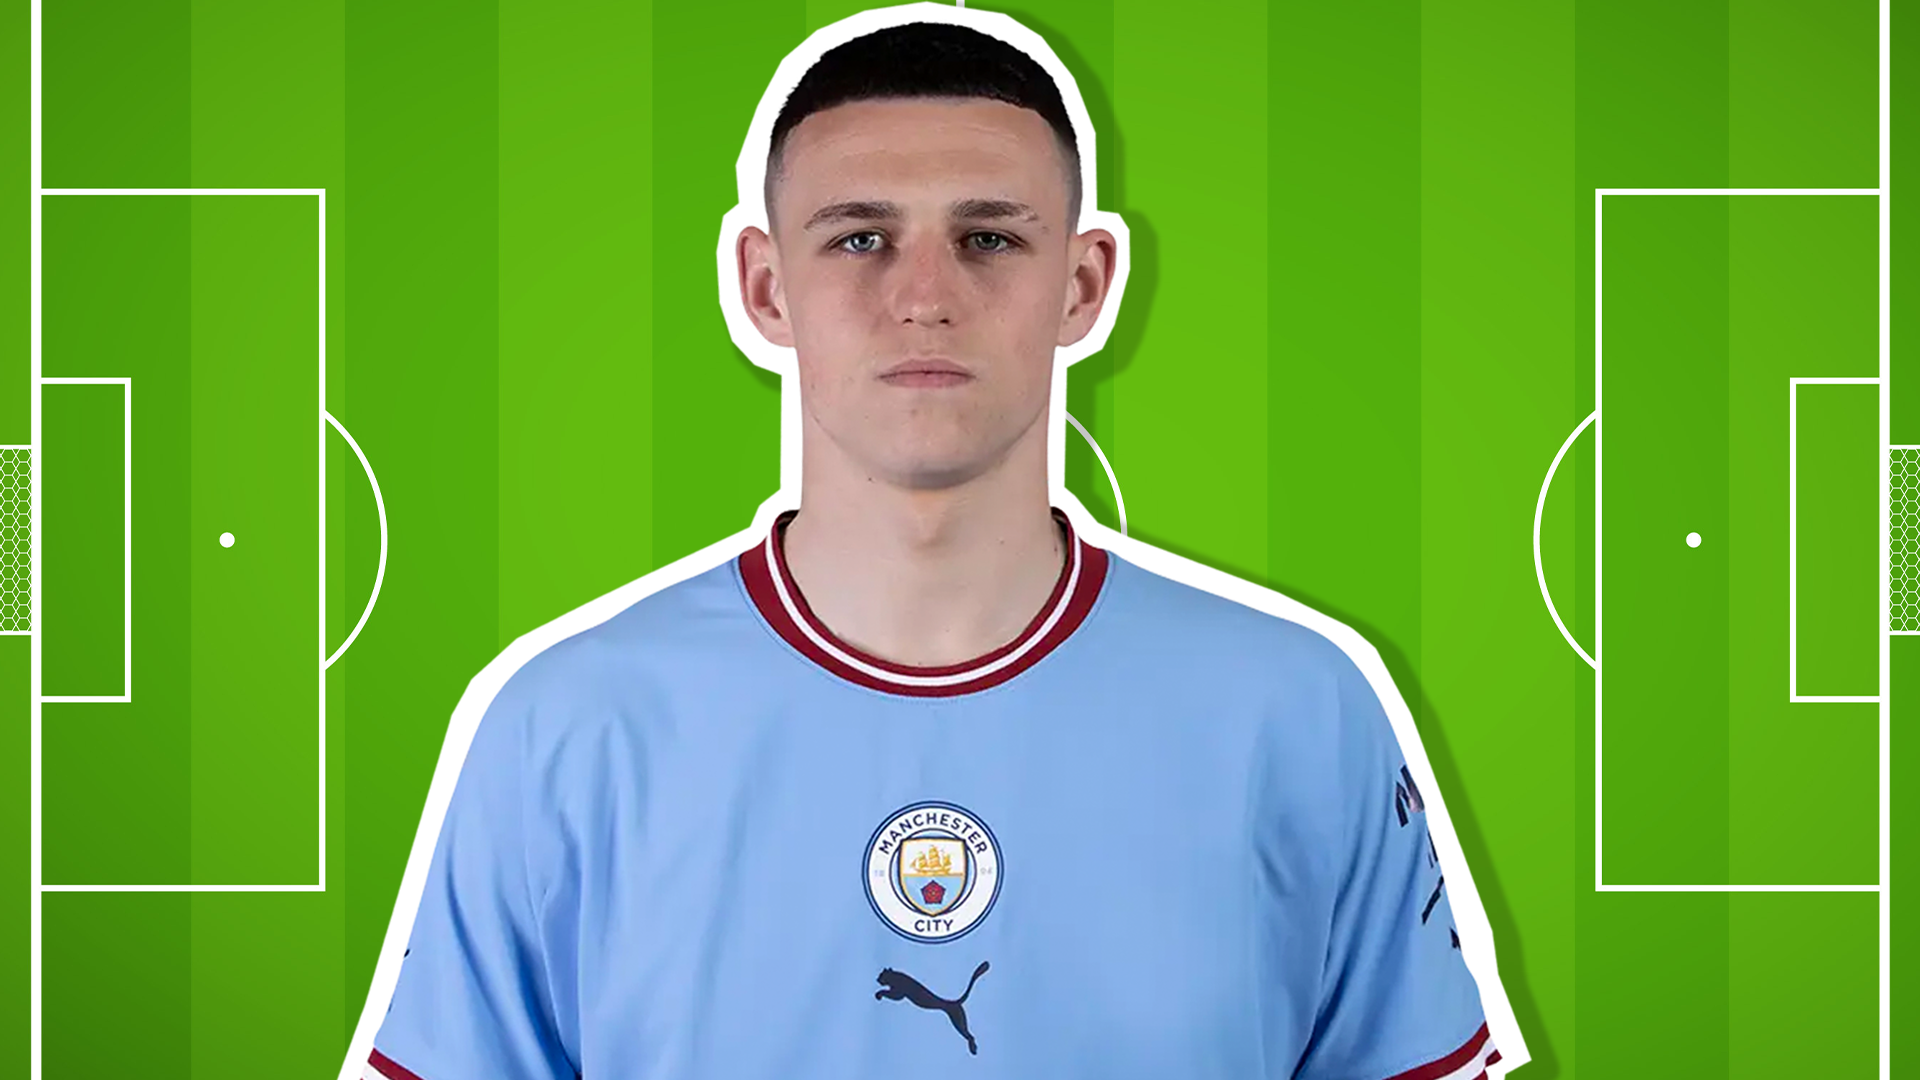 Phil Foden in his Manchester City shirt